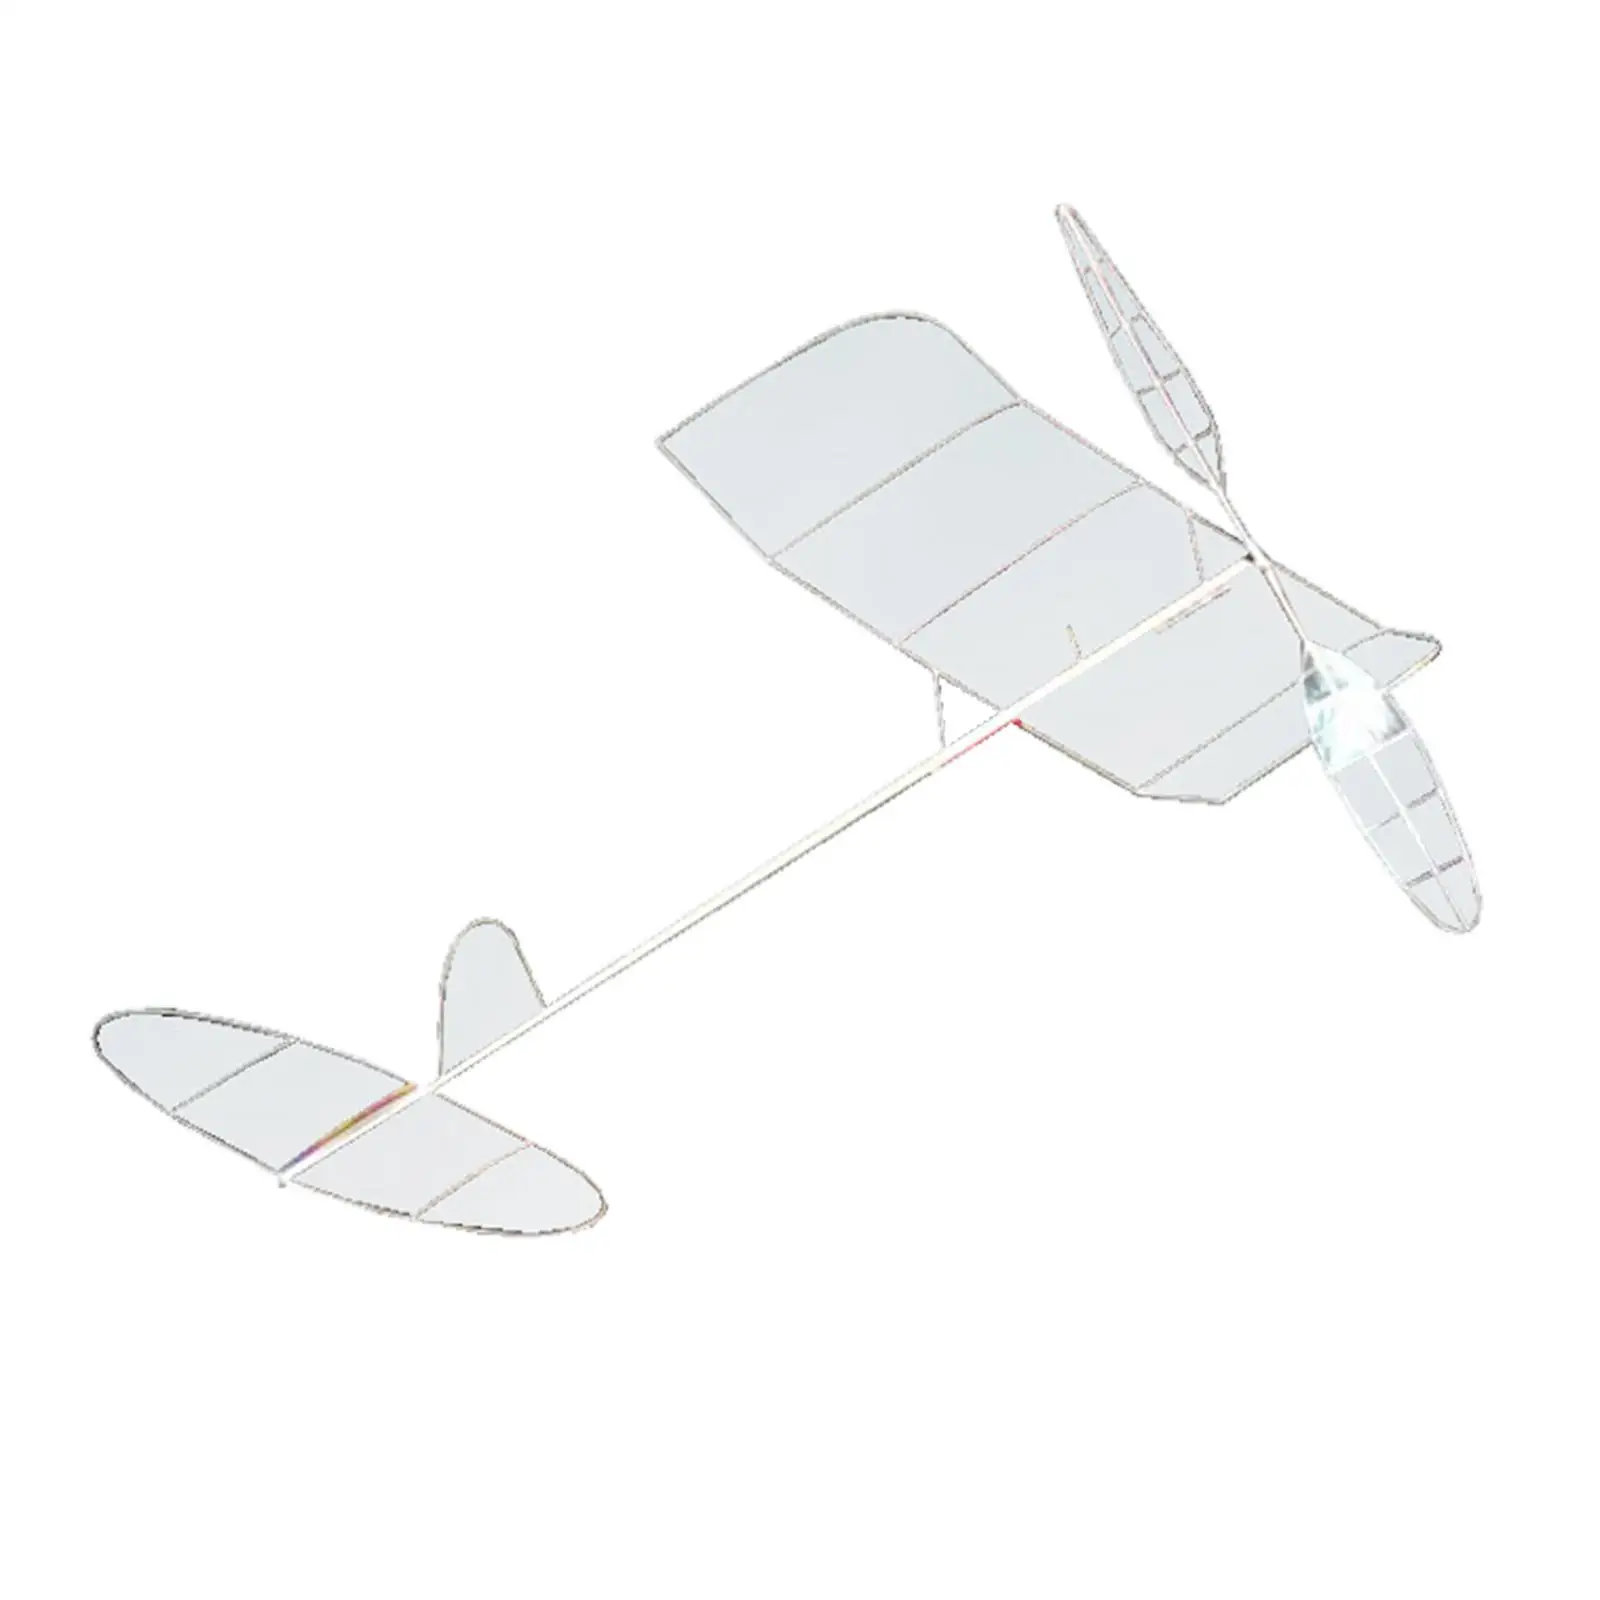 

Elastic Powered Airplane Model Logical Thinking Rubber Band Powered Airplane Airplane Model Toy for Game Playground Sport Party